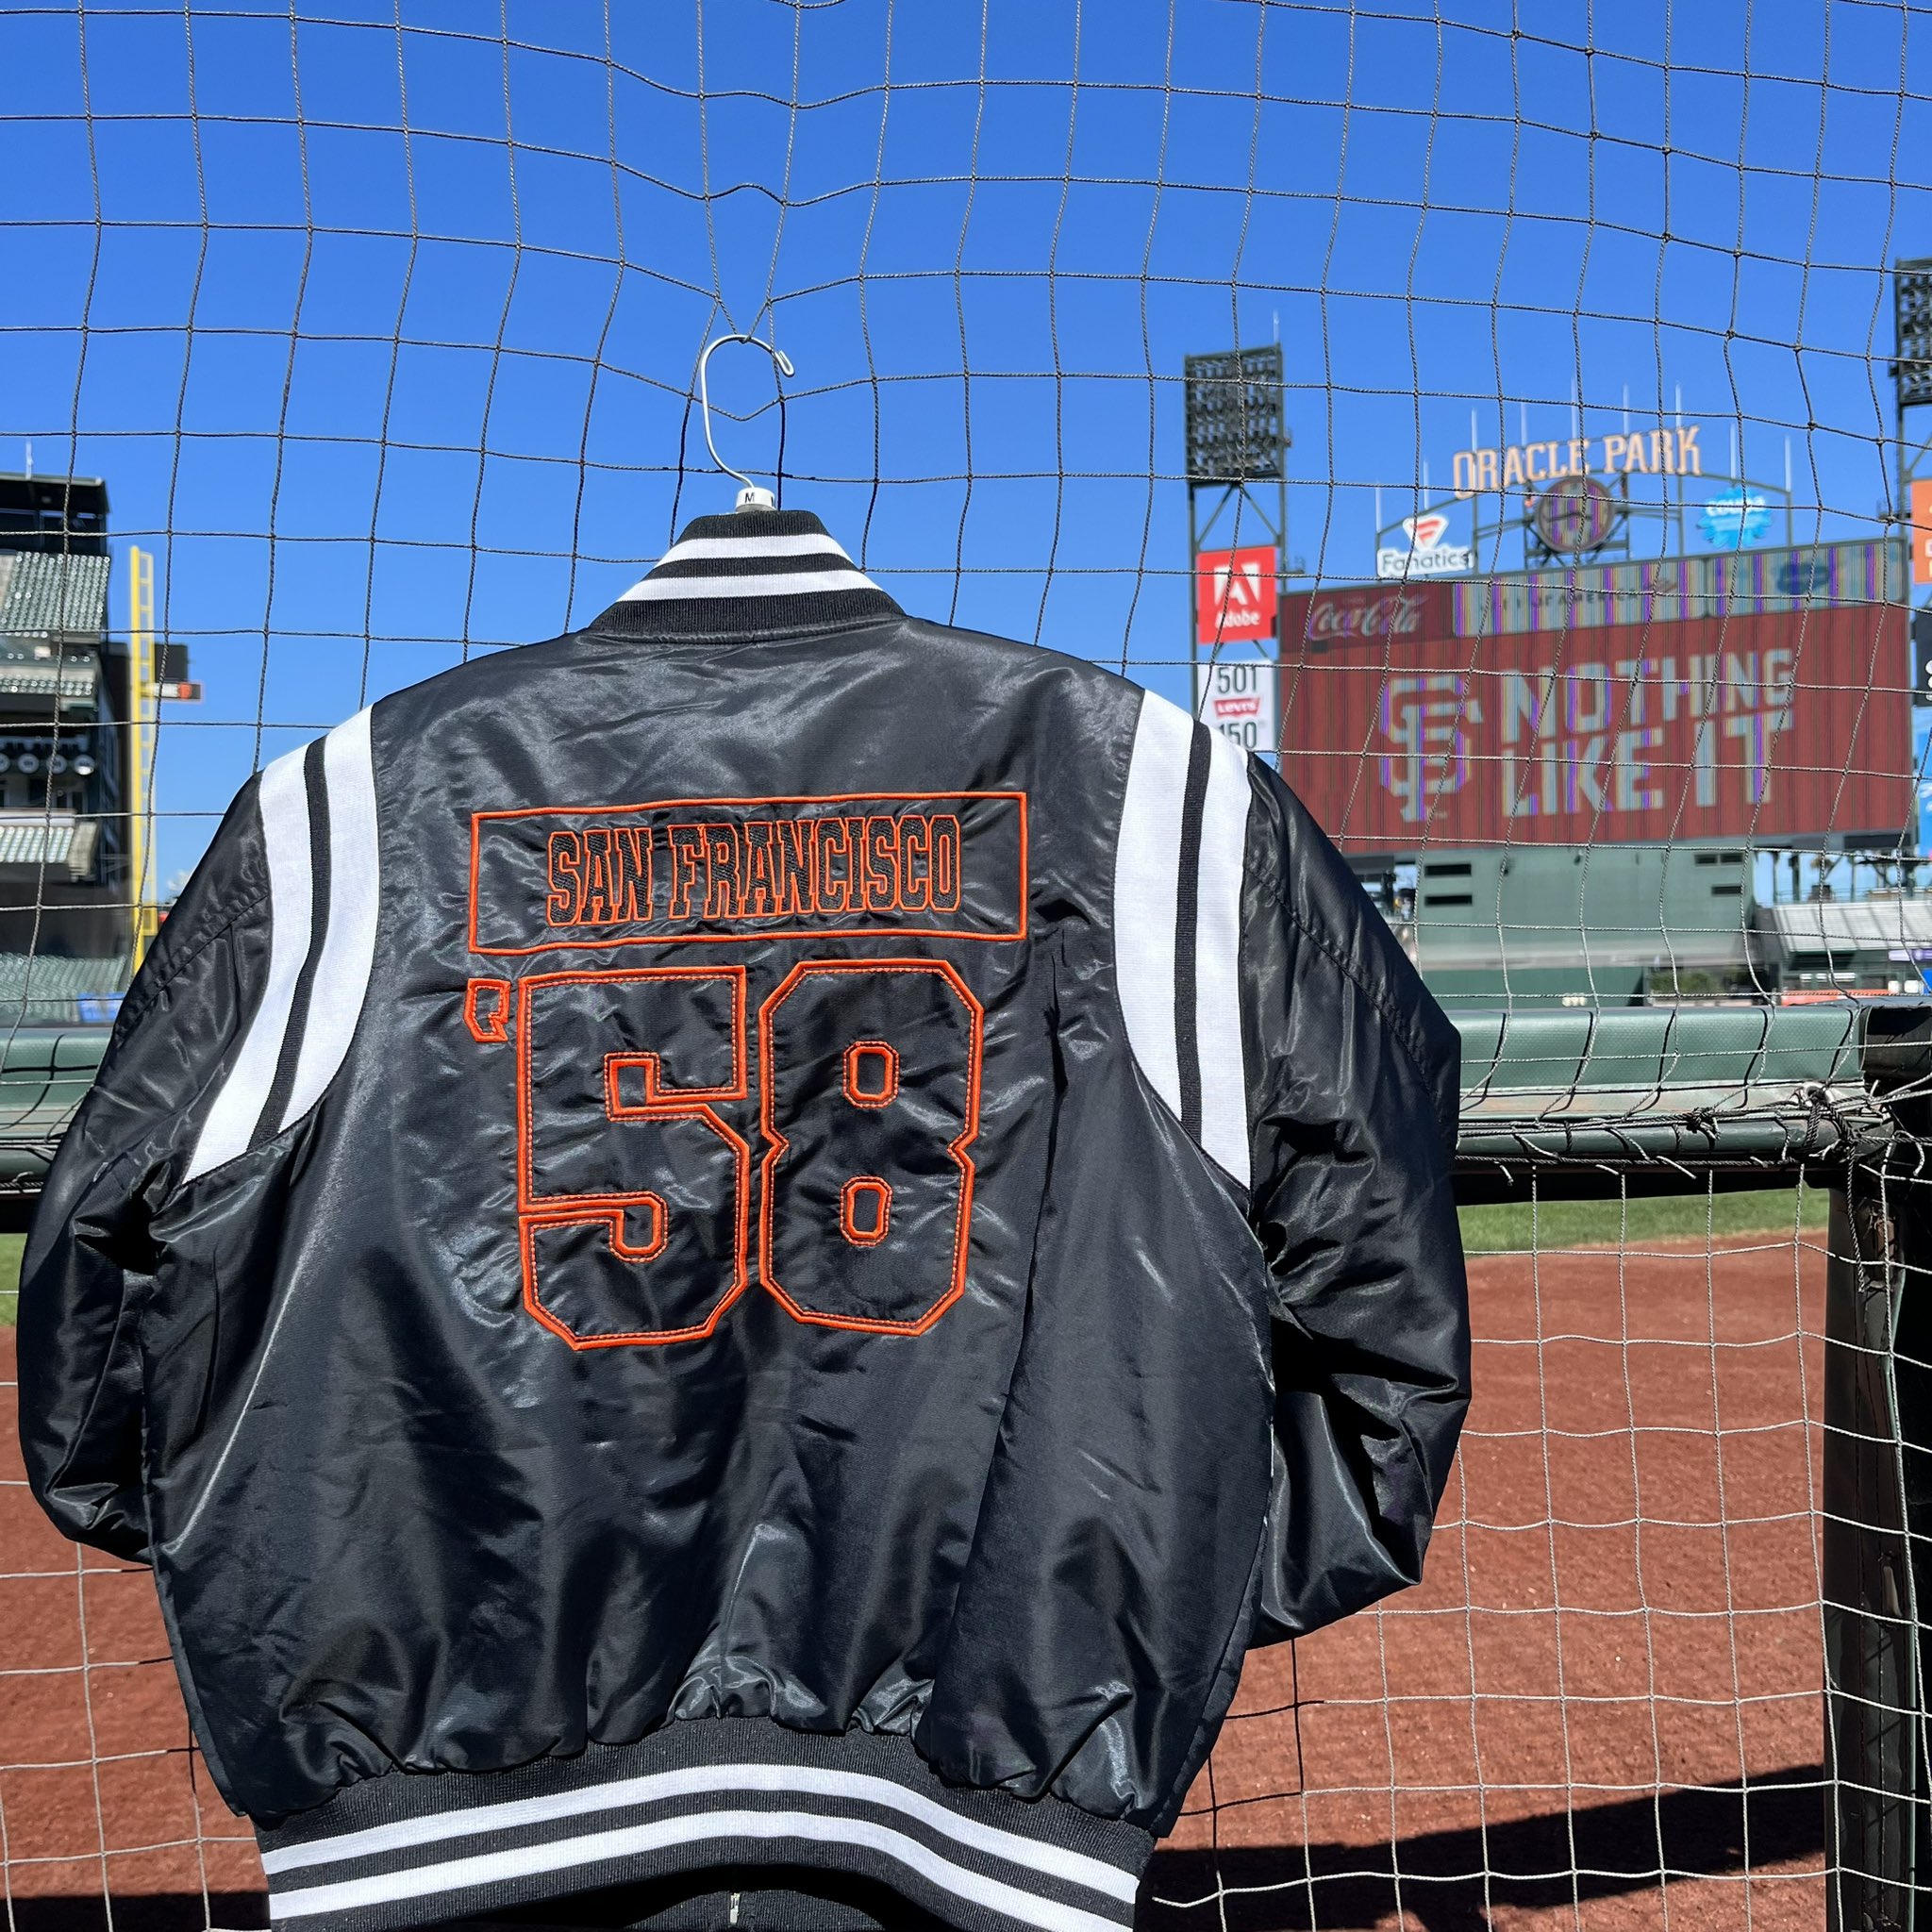 Giants Dugout Store at Oracle Park